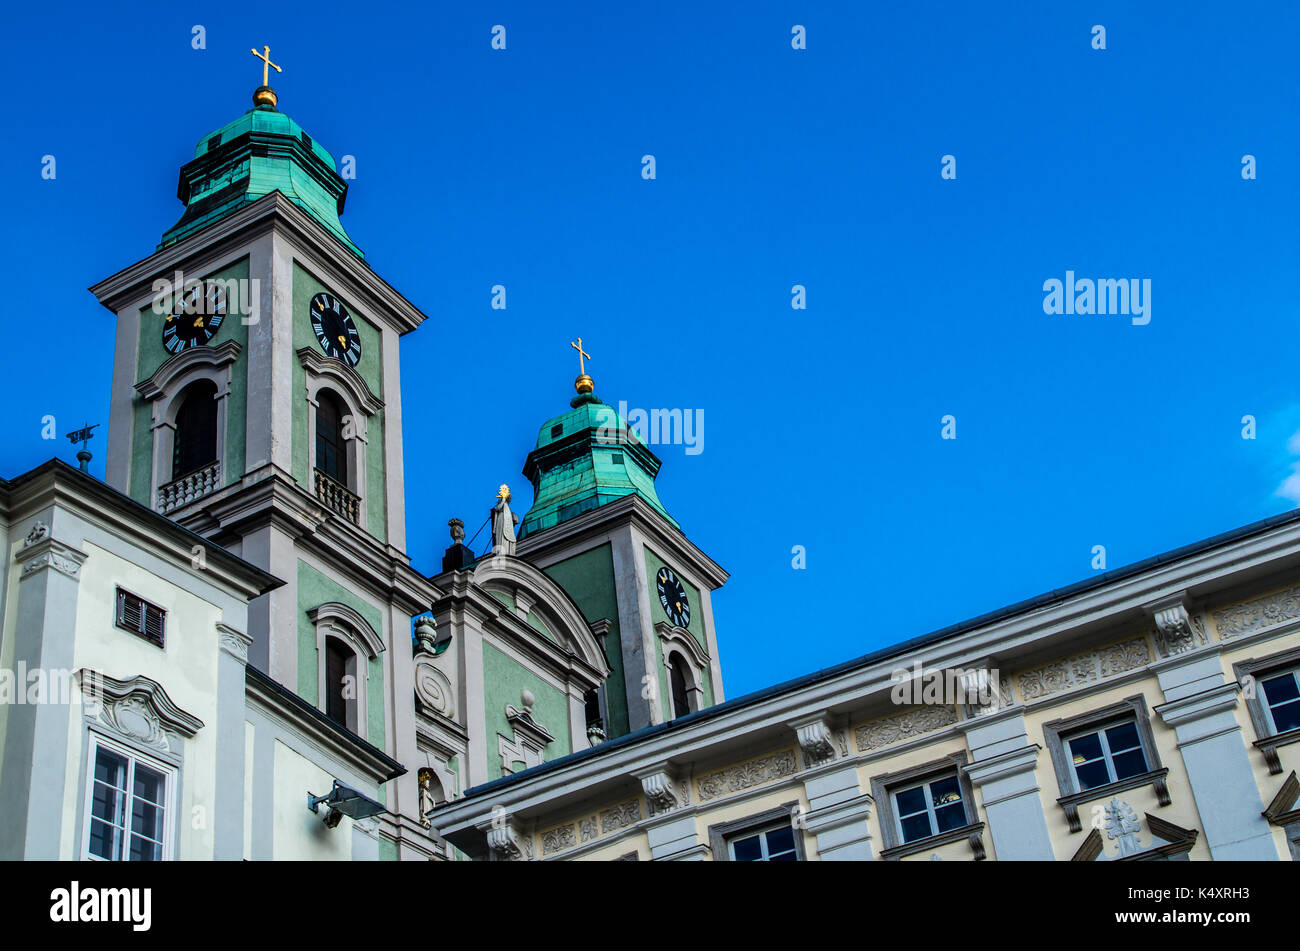 Old church in linz austria, with an aqua, blue exterior facade. a place of interest and a monumental piece of art and architectural construction Stock Photo